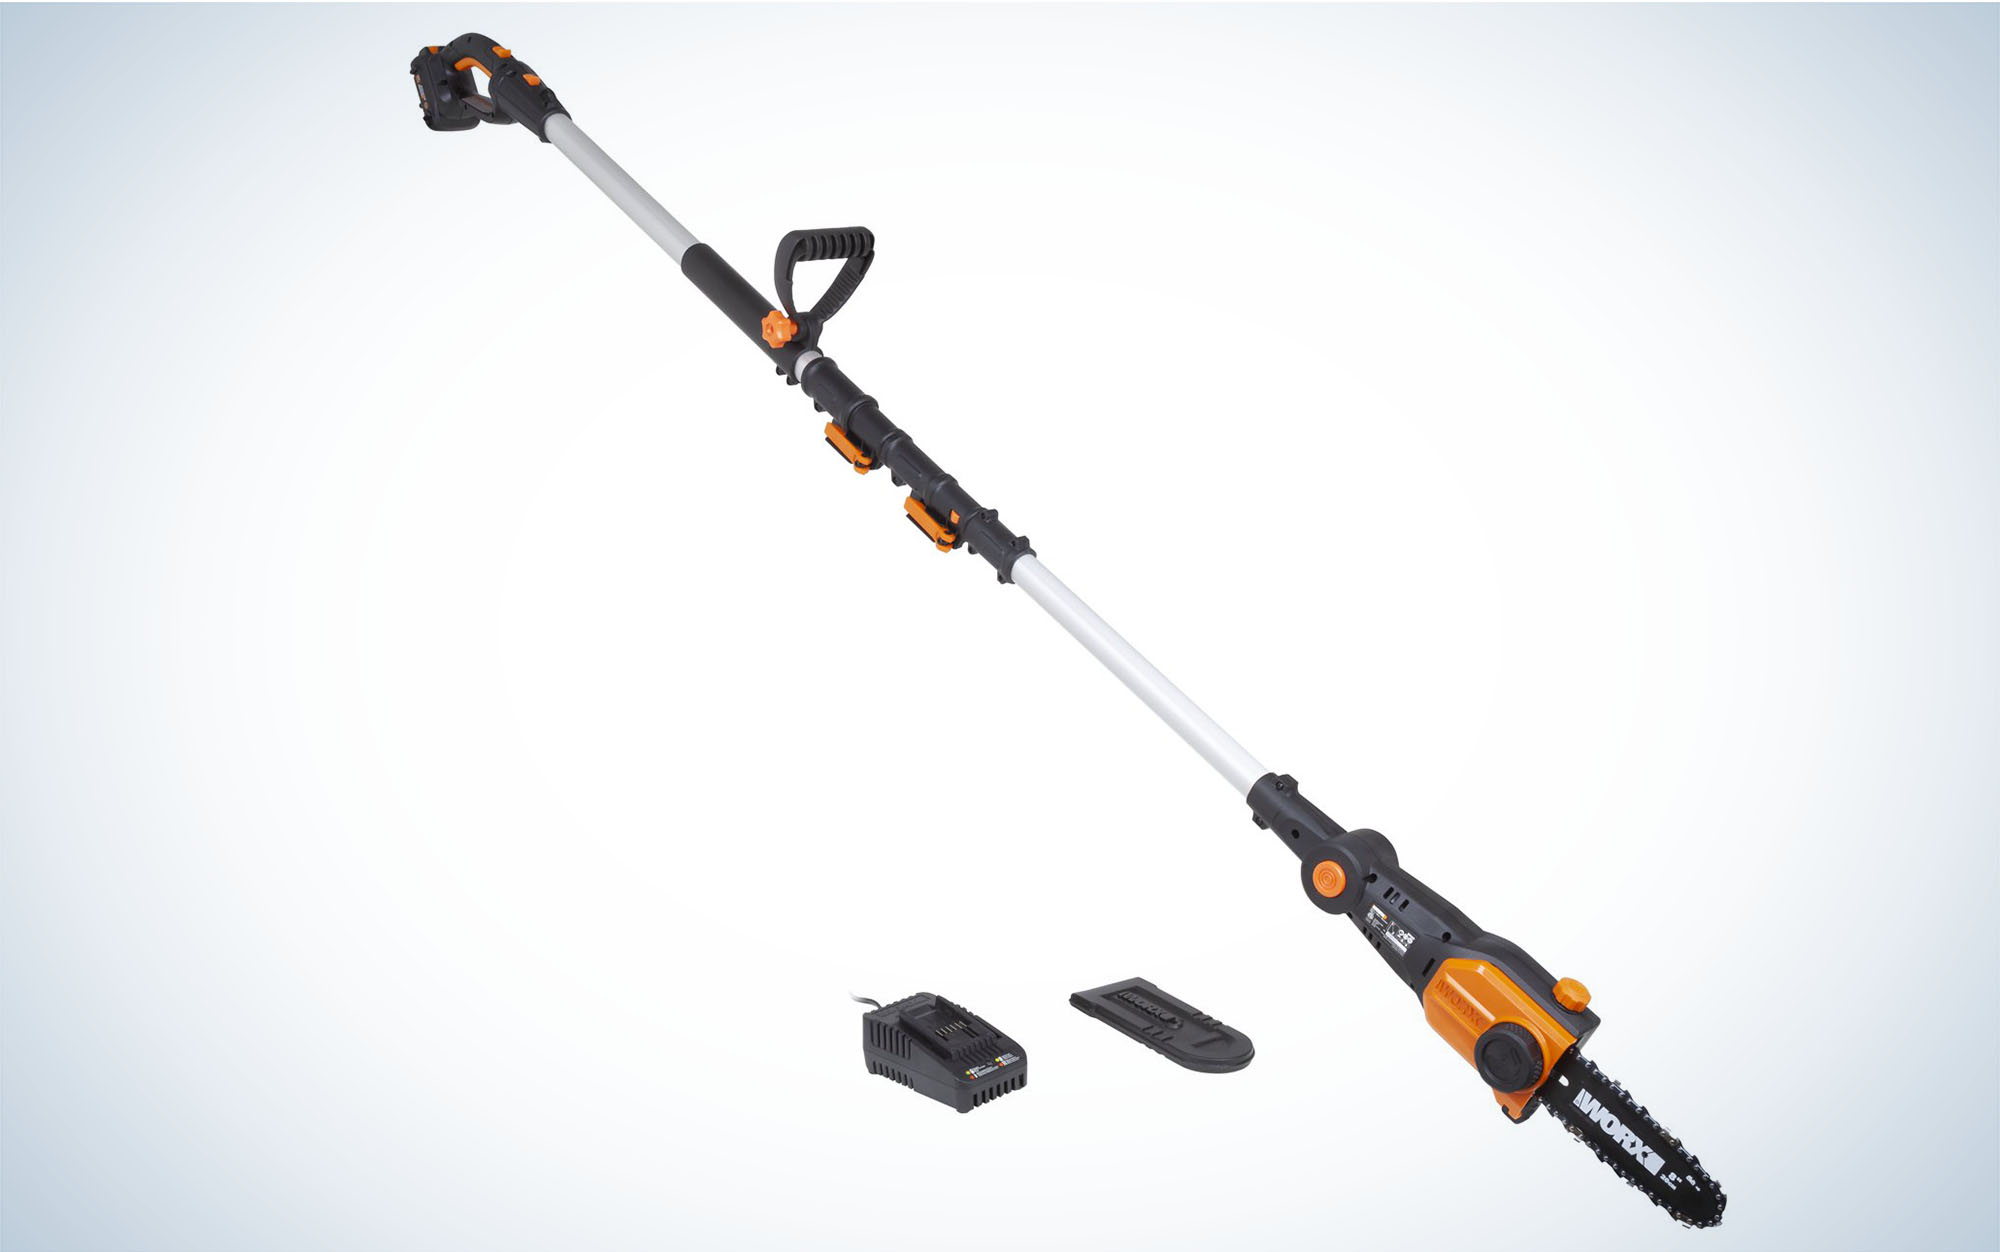 The Worx 20v Power Share Pole Saw is one of the best pole saws.